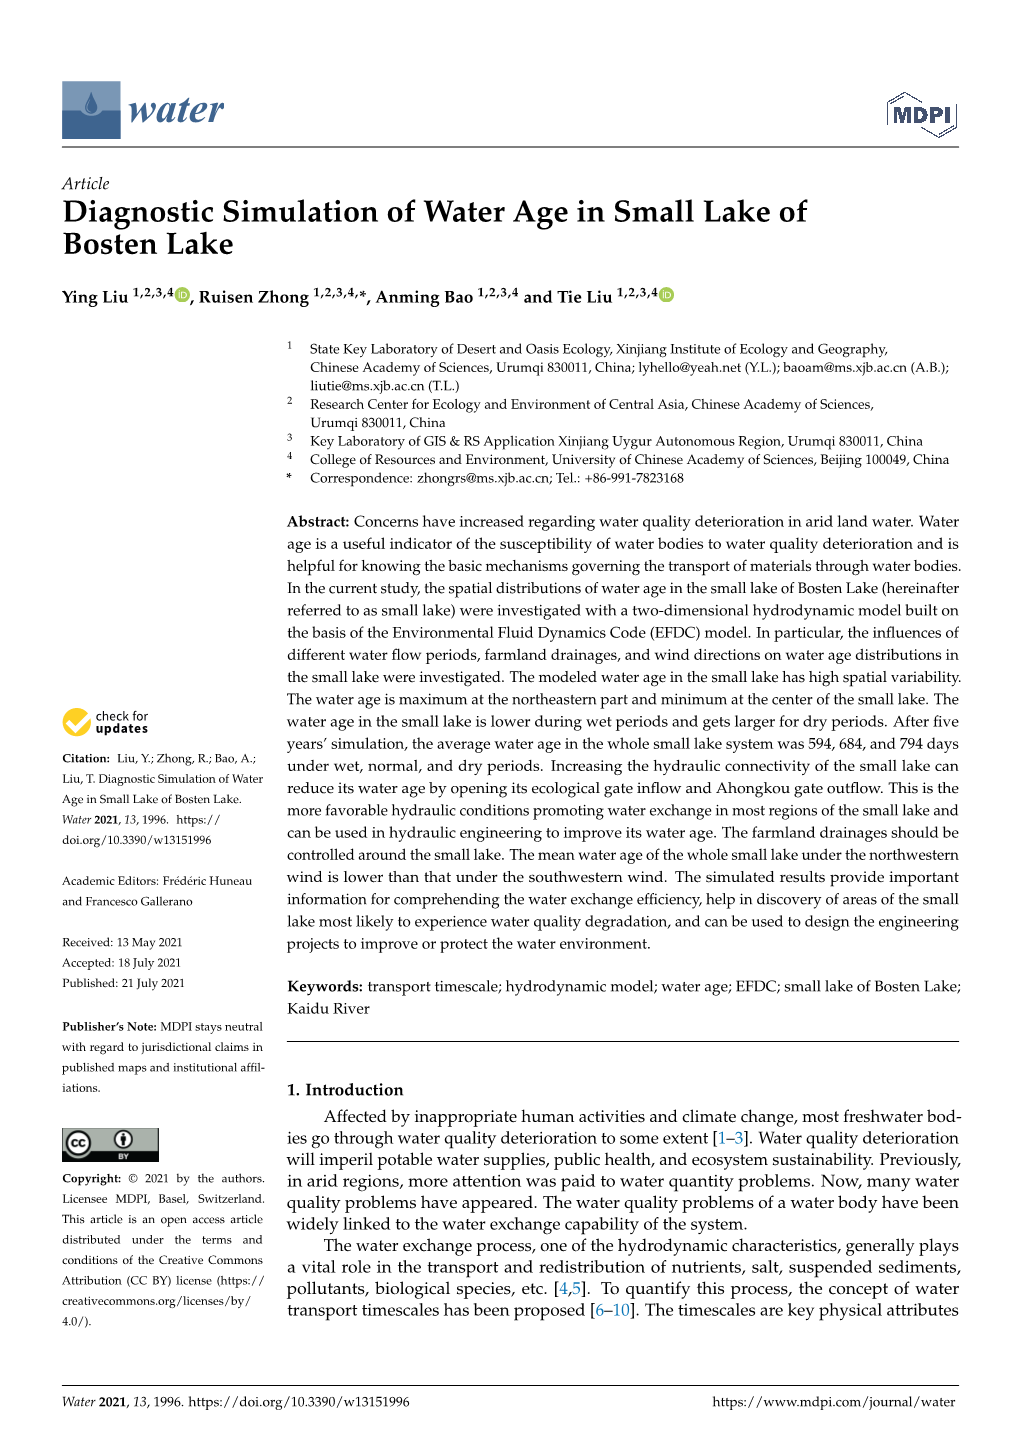 Diagnostic Simulation of Water Age in Small Lake of Bosten Lake